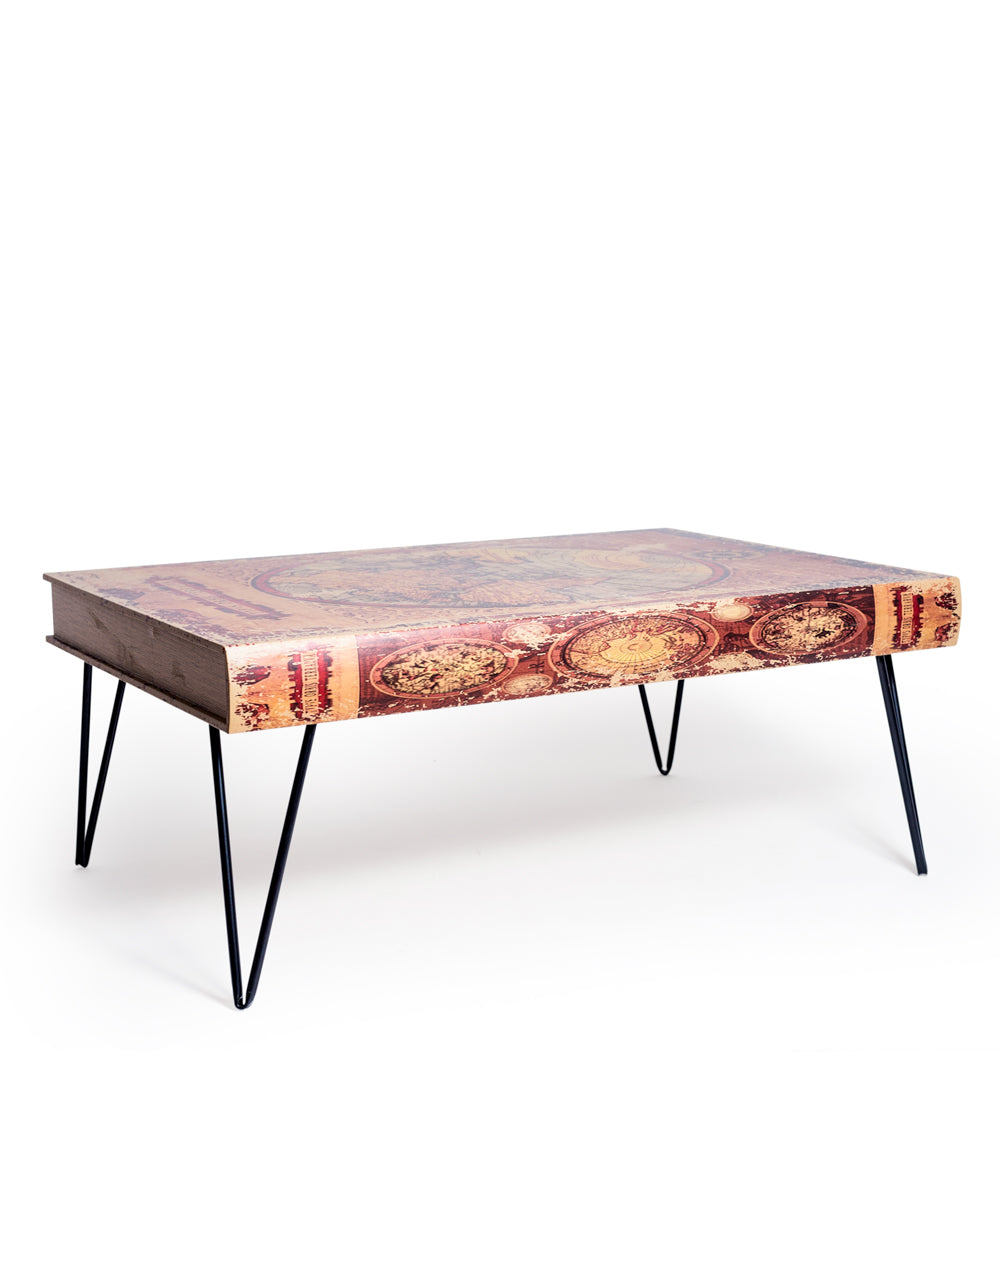 Antiqued Atlas/Book Coffee Table with Hairpin Legs